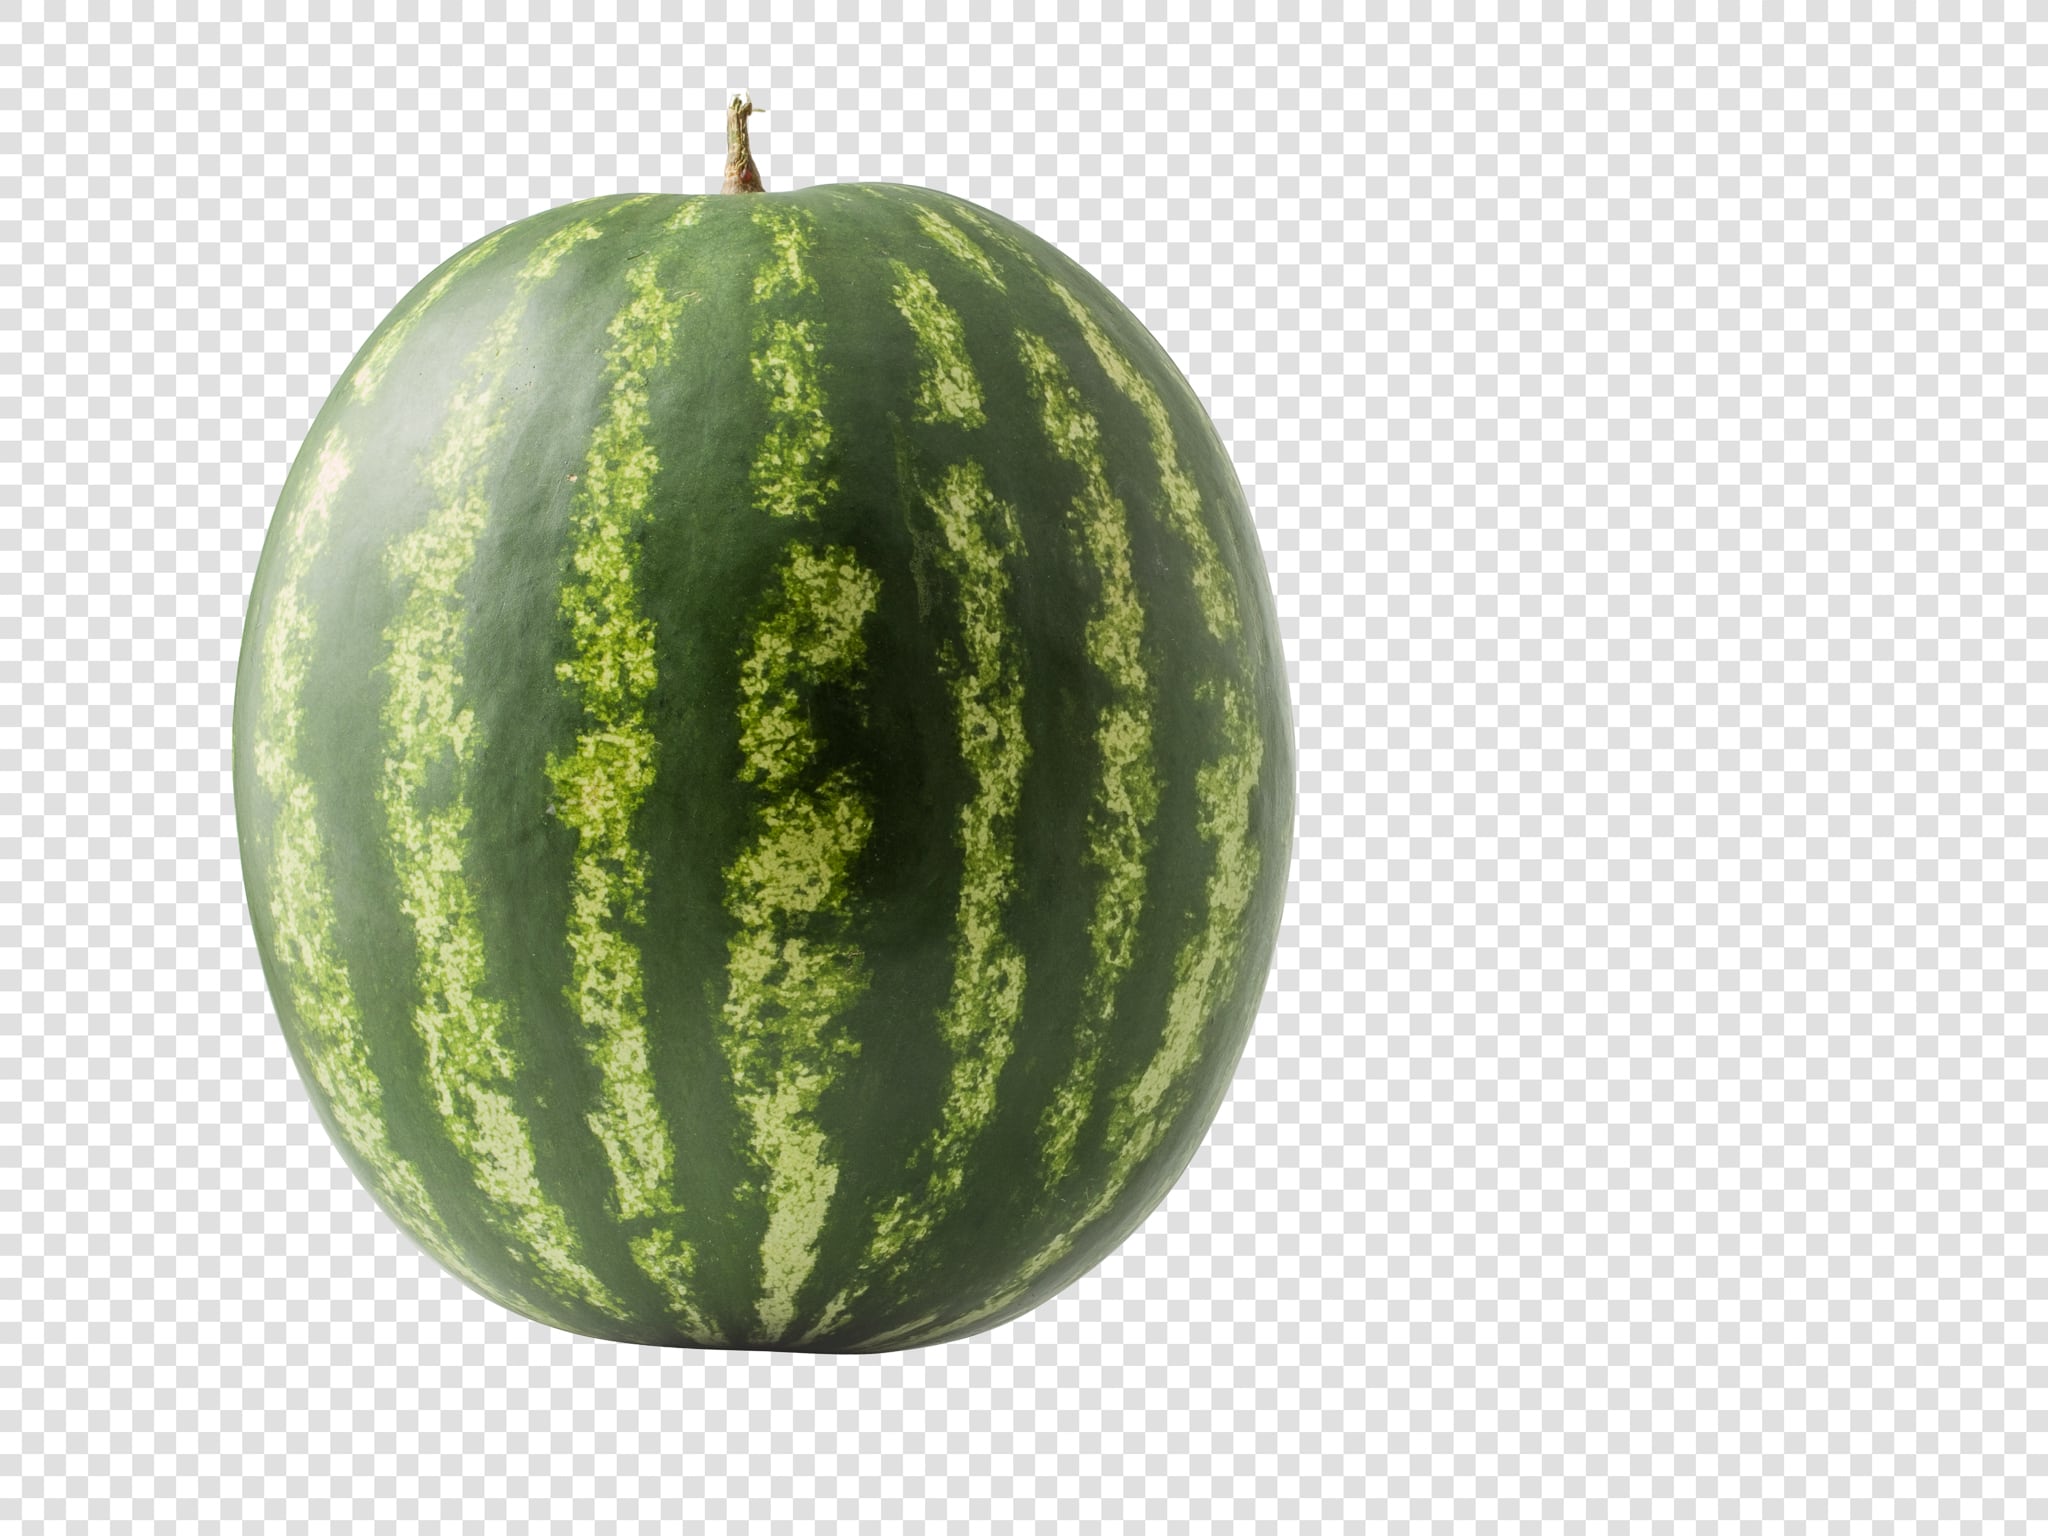 Watermelon PSD isolated image